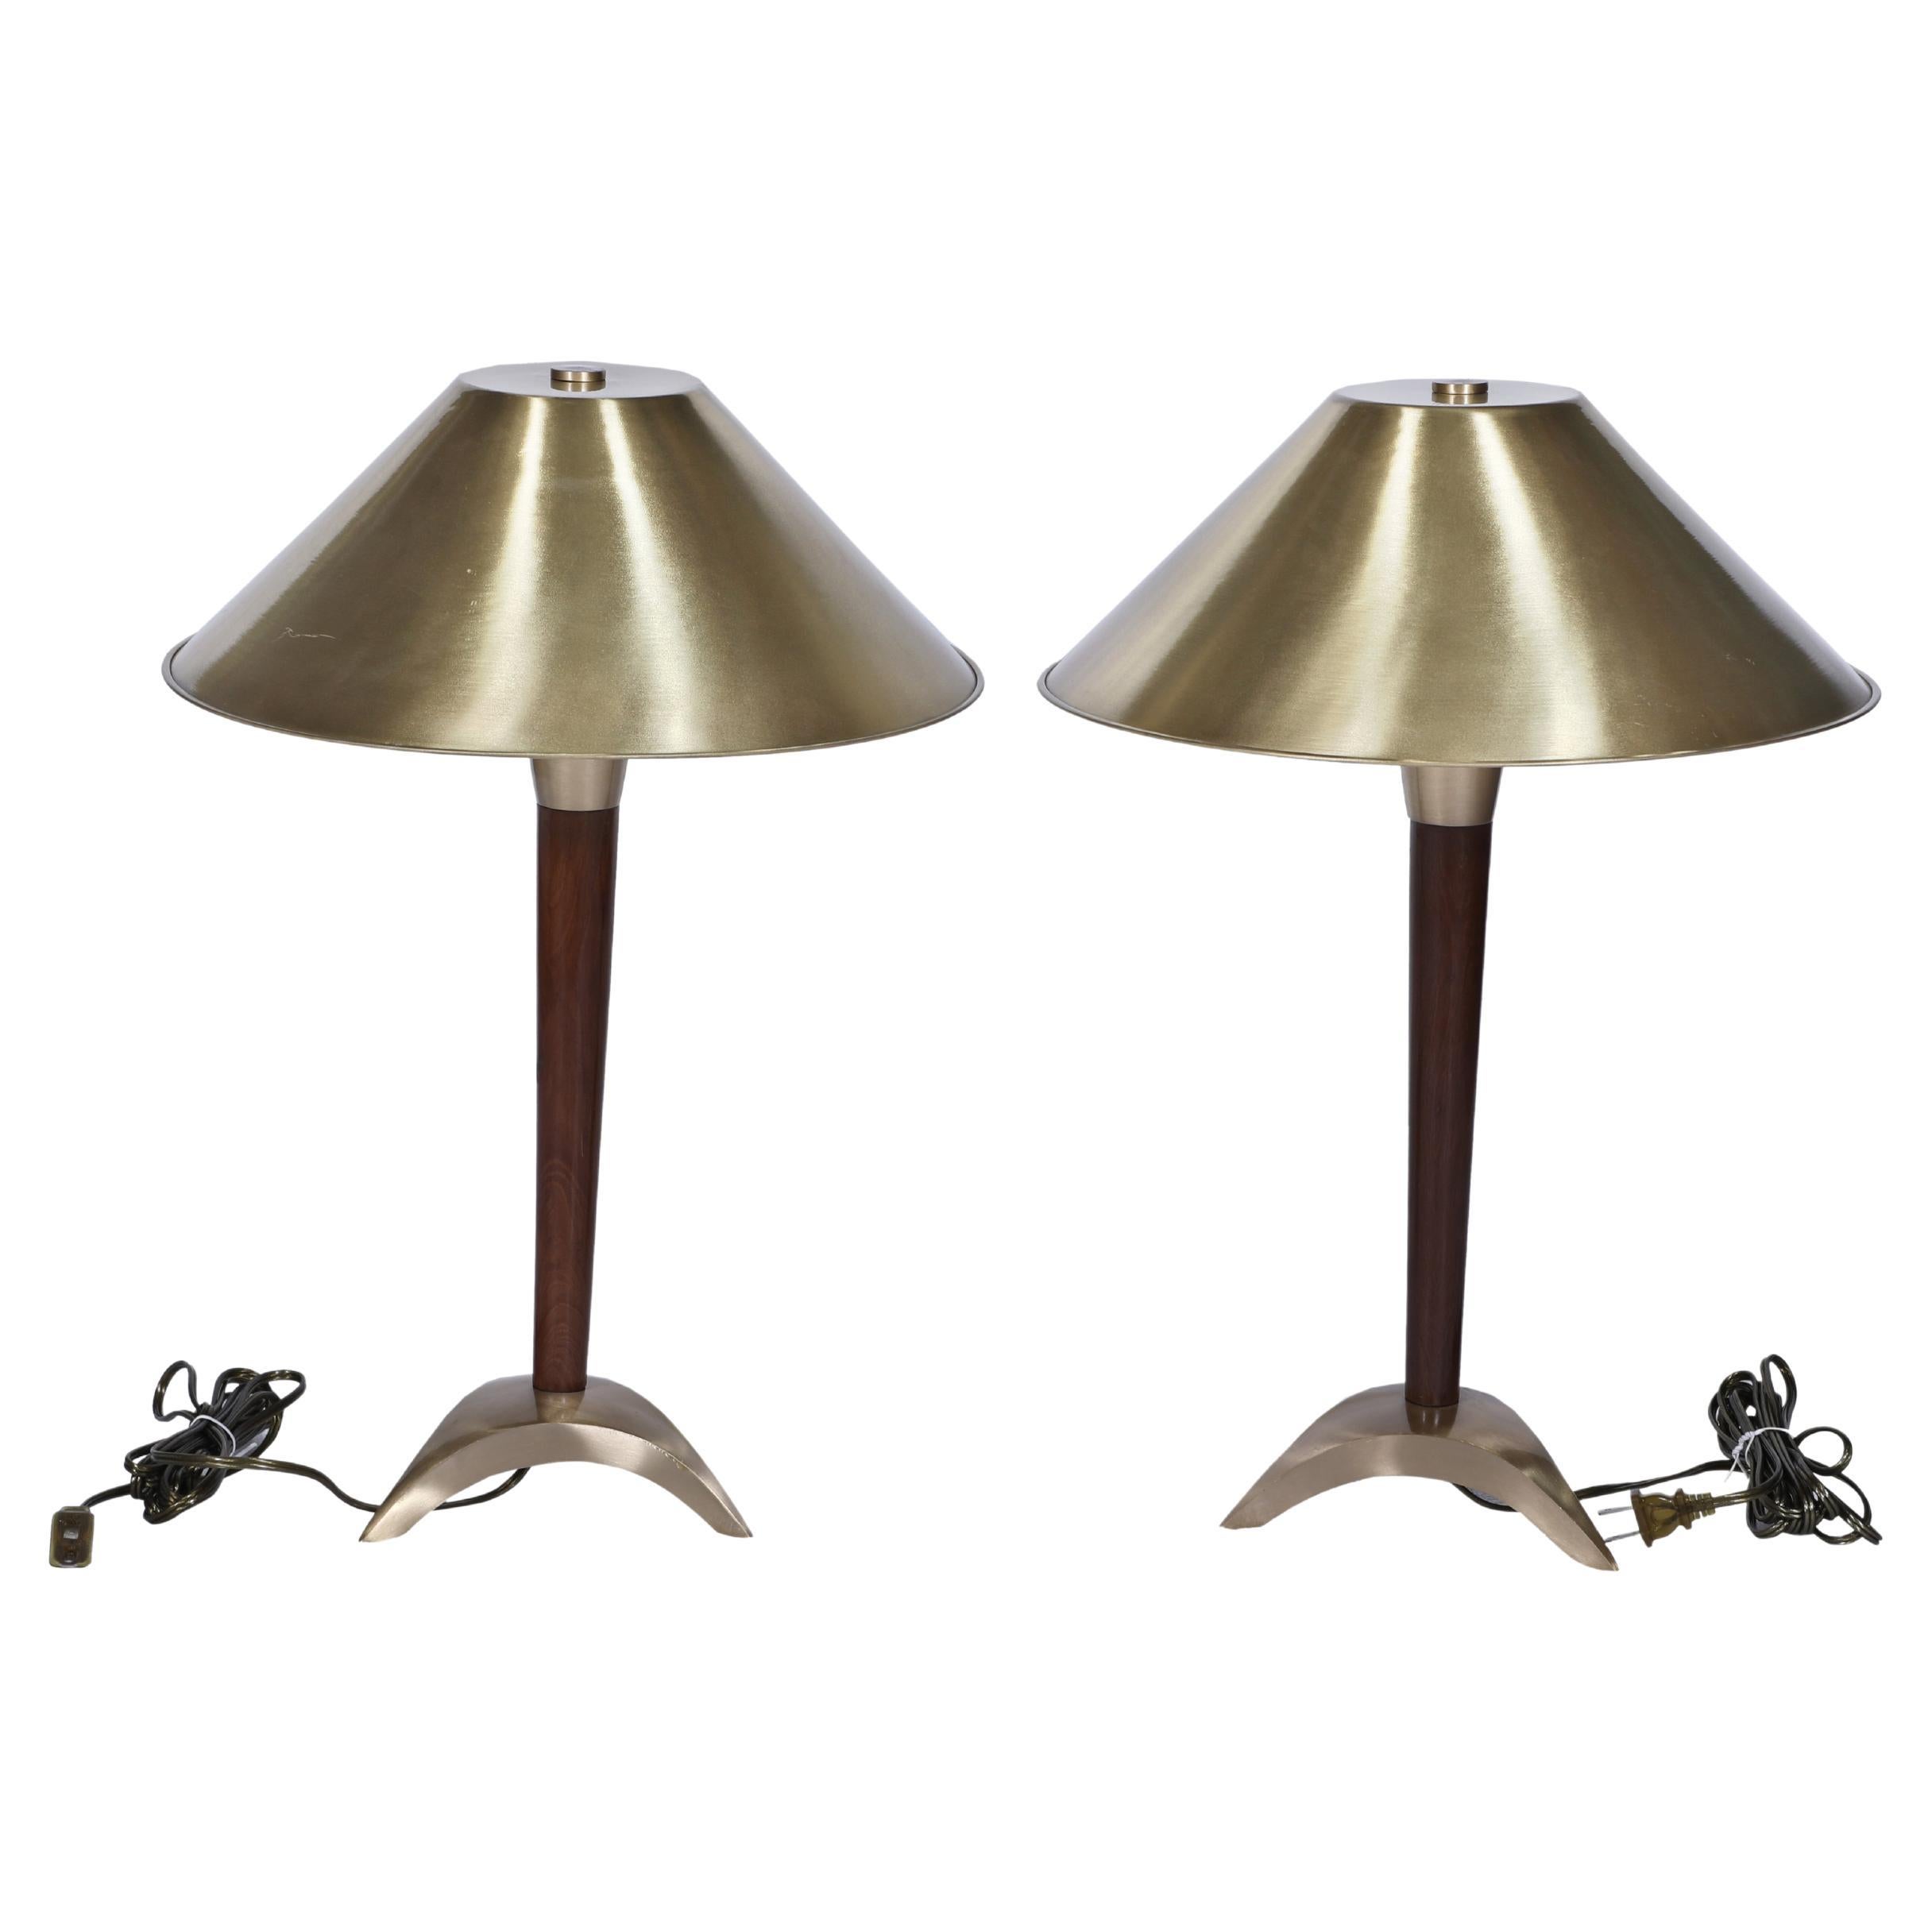 Pair of Nautical Brass and Teak Ship's Stateroom Table Lamps